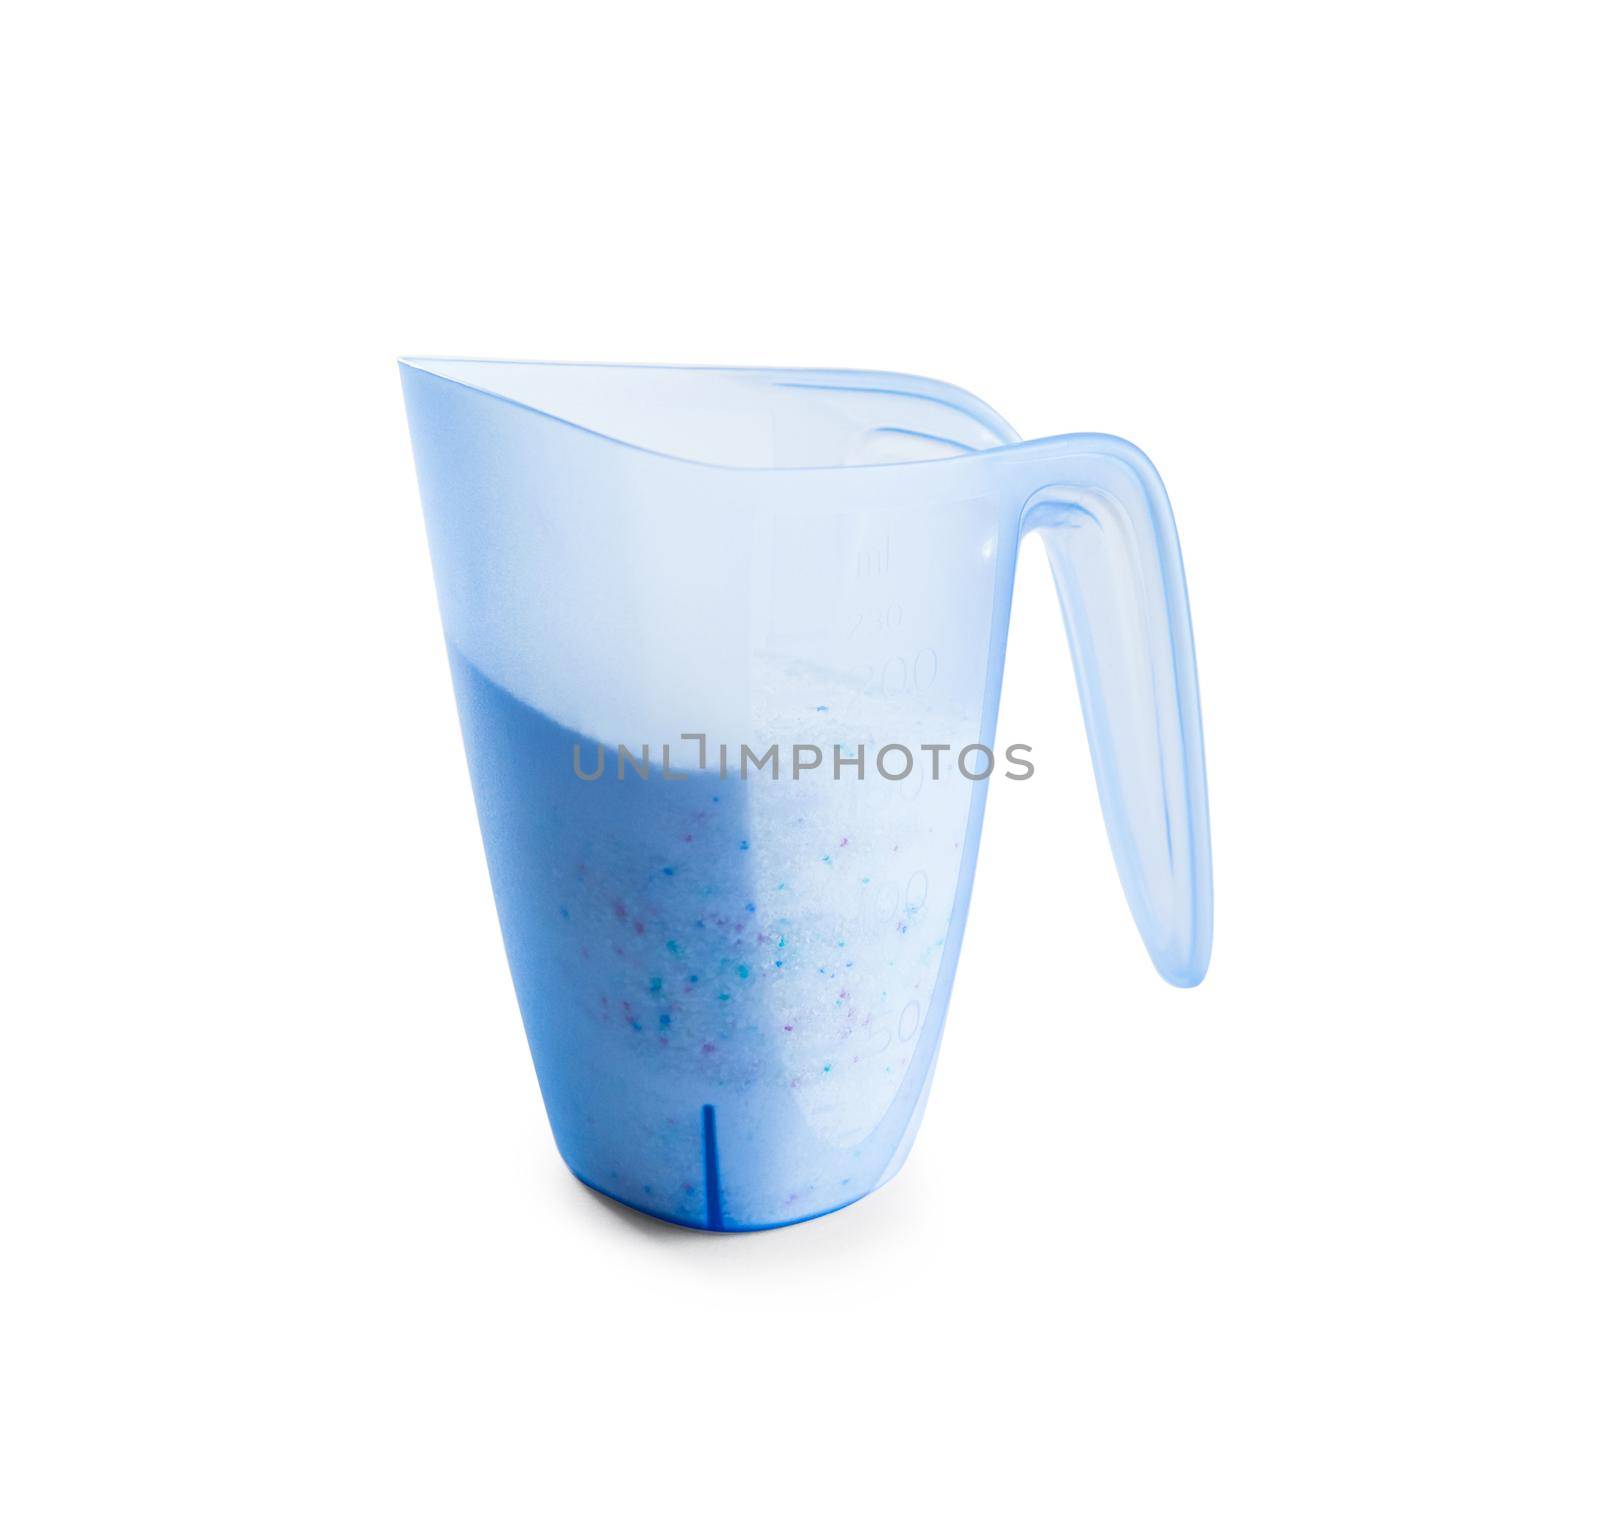 washing powder in a measuring cup by tan4ikk1